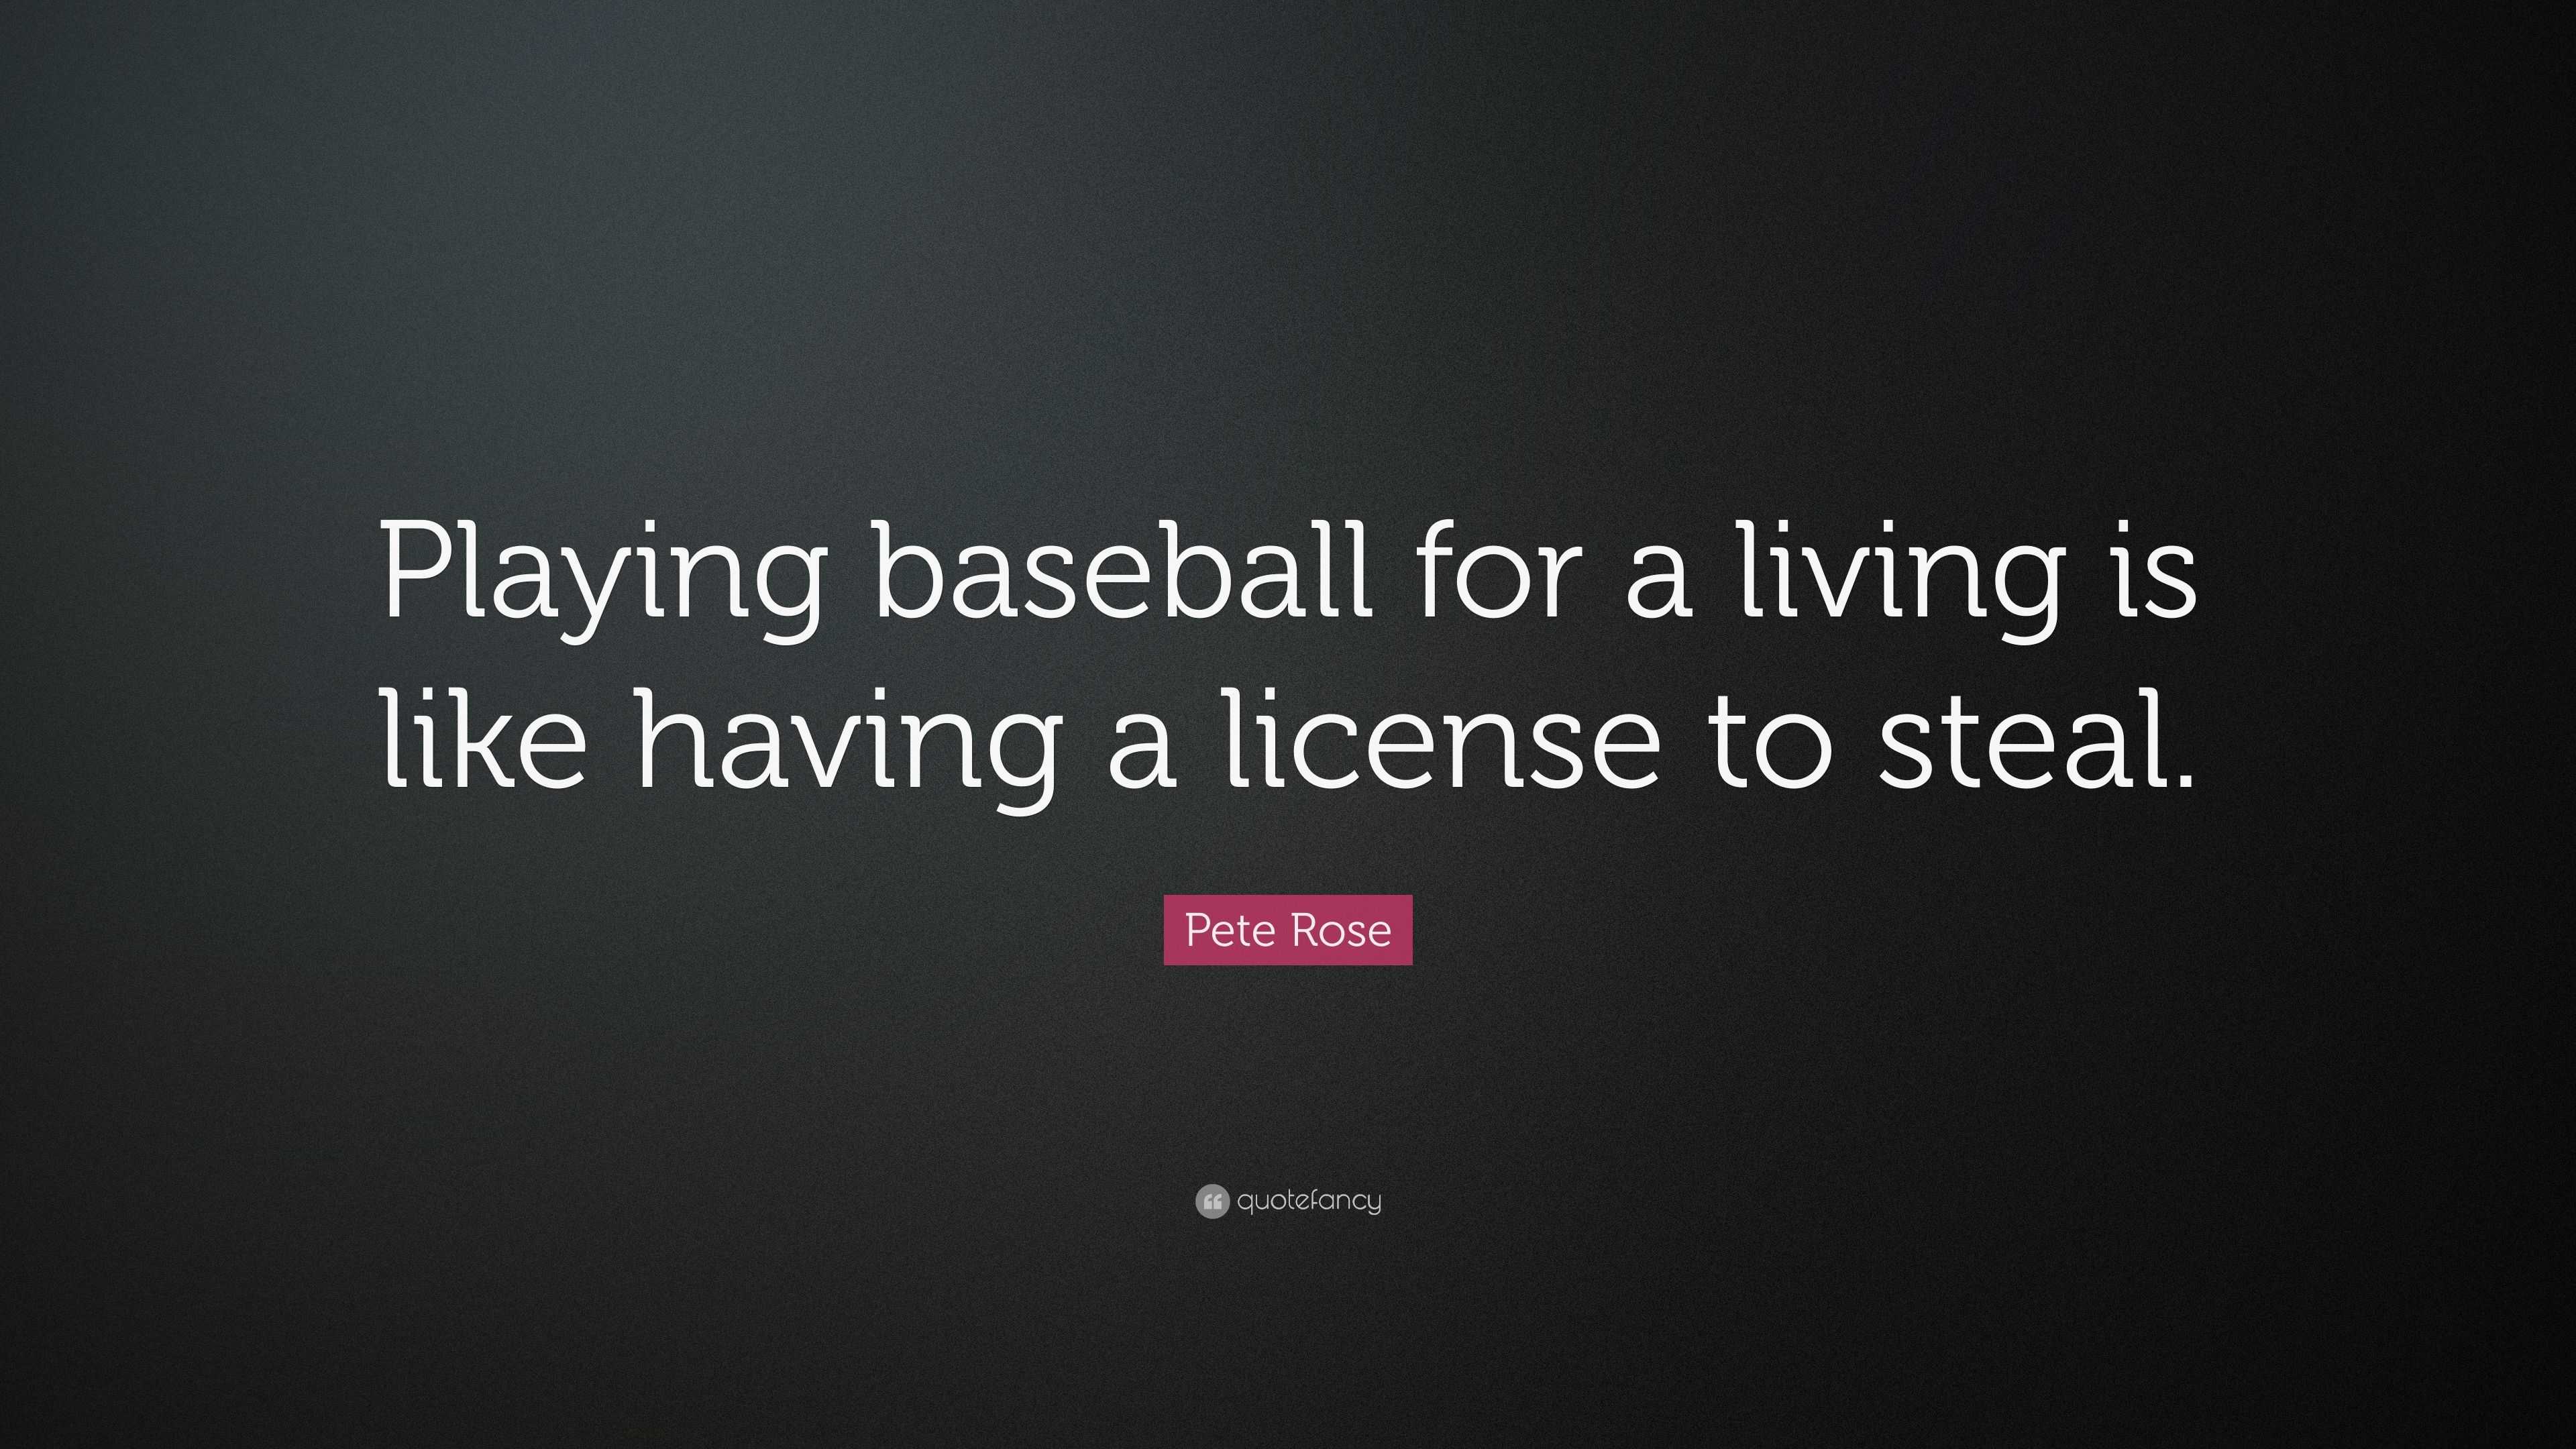 Pete Rose Quote: “Playing baseball for a living is like having a ...